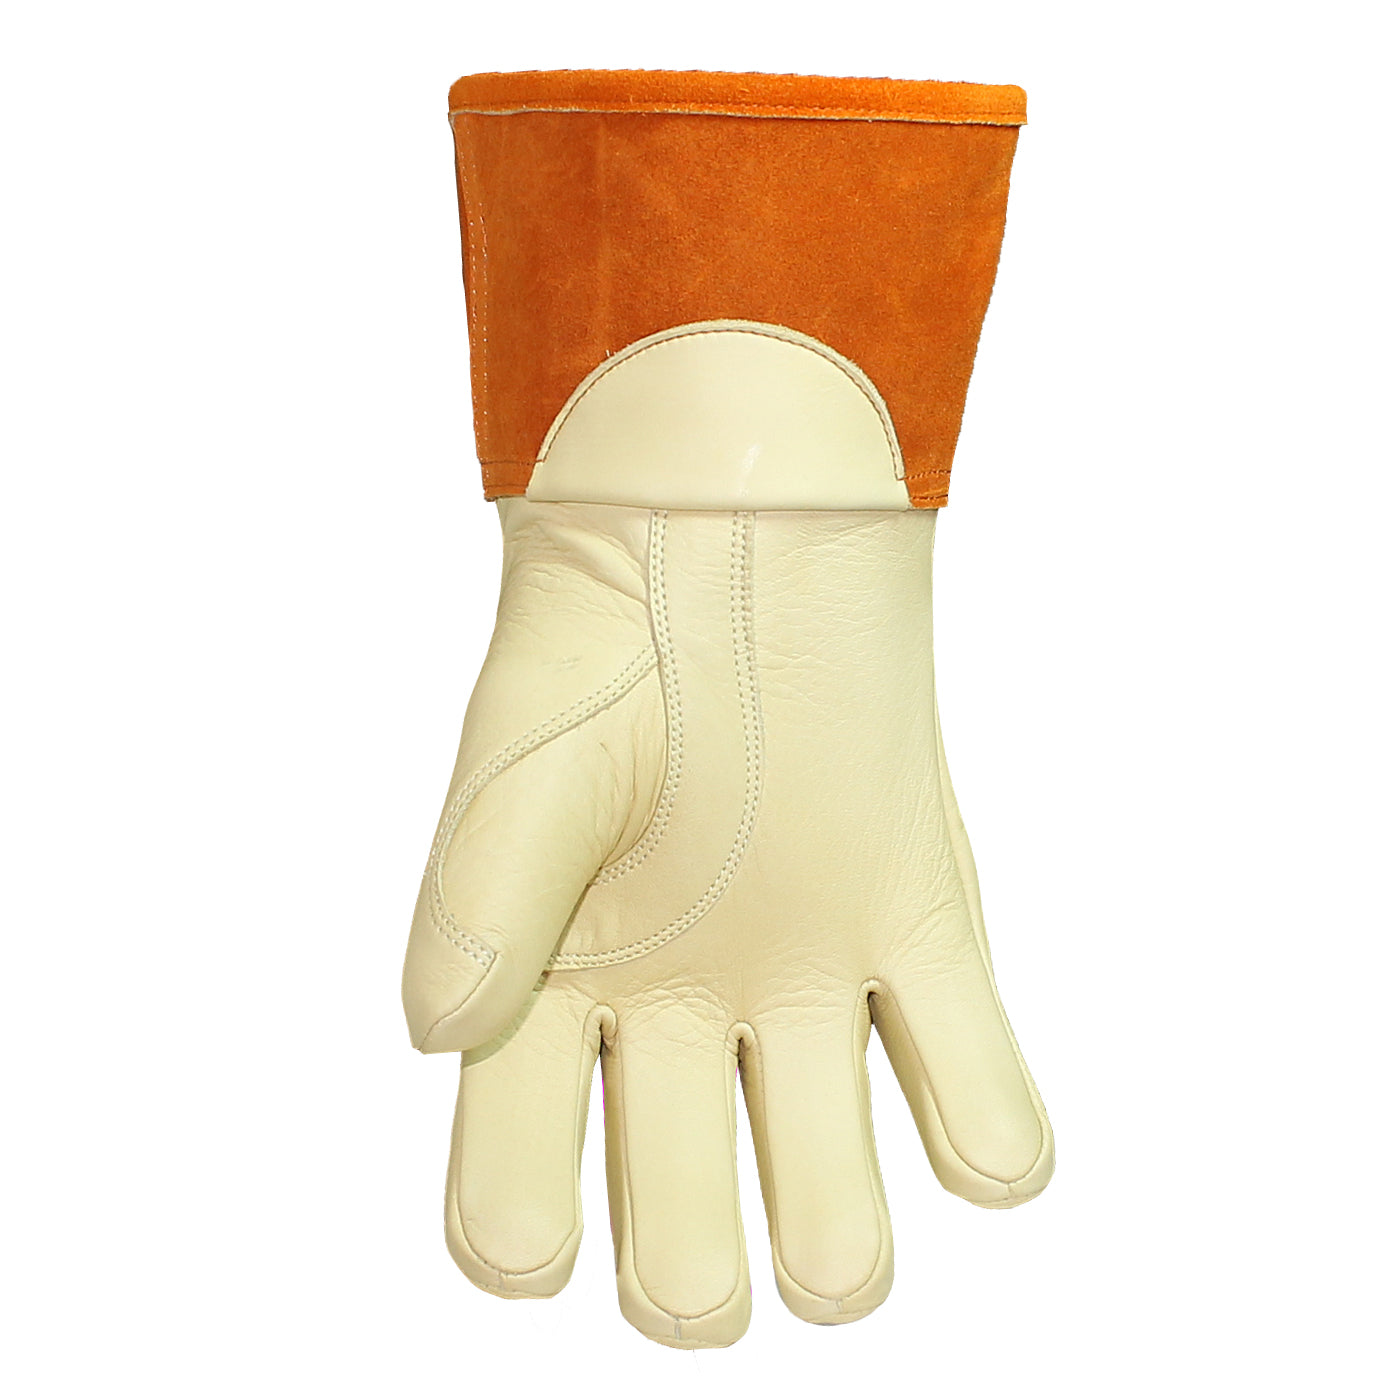 Youngstown 12” Primary Protector Leather Glove - Front view